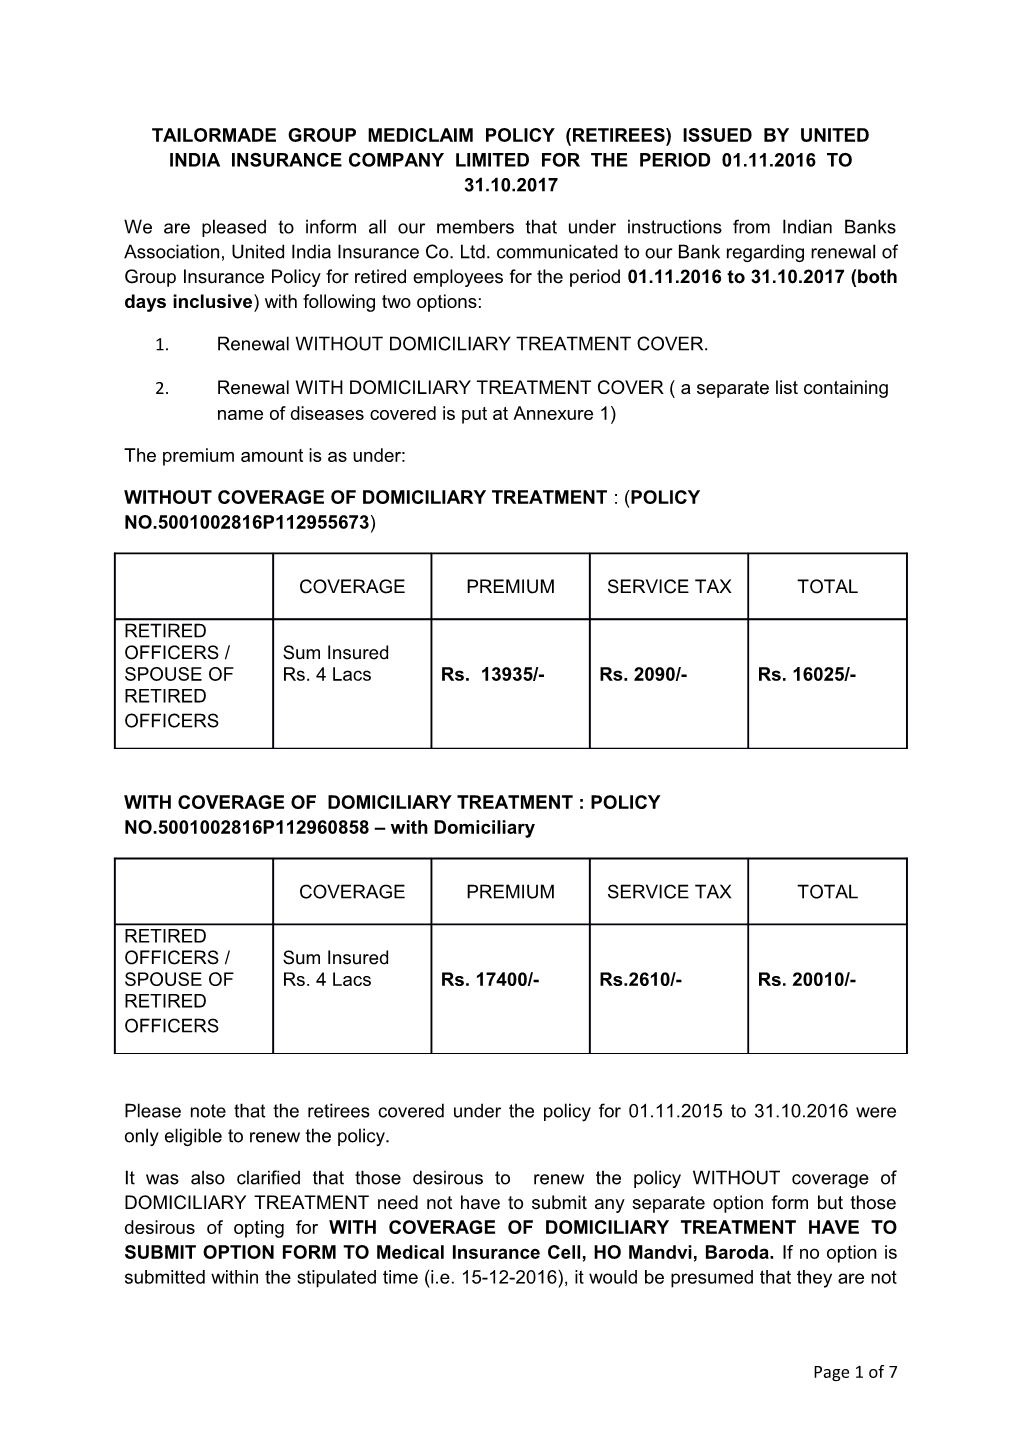 Tailormade Group Mediclaim Policy (Retirees) Issued by United India Insurance Company